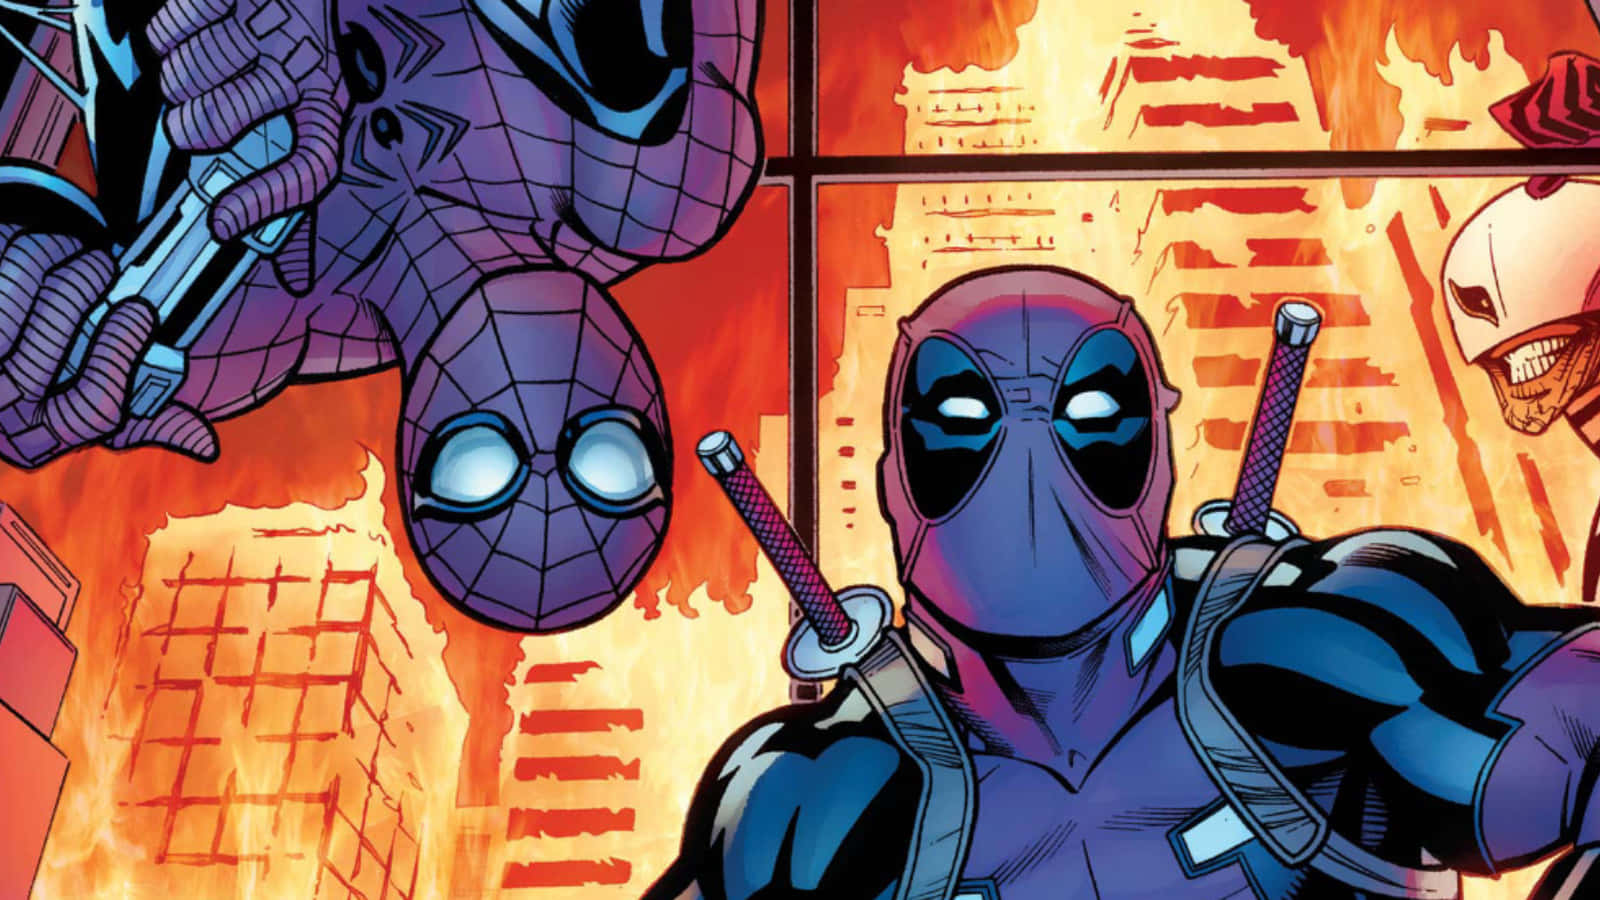 Deadpool and Spiderman's Epic Team-up Wallpaper